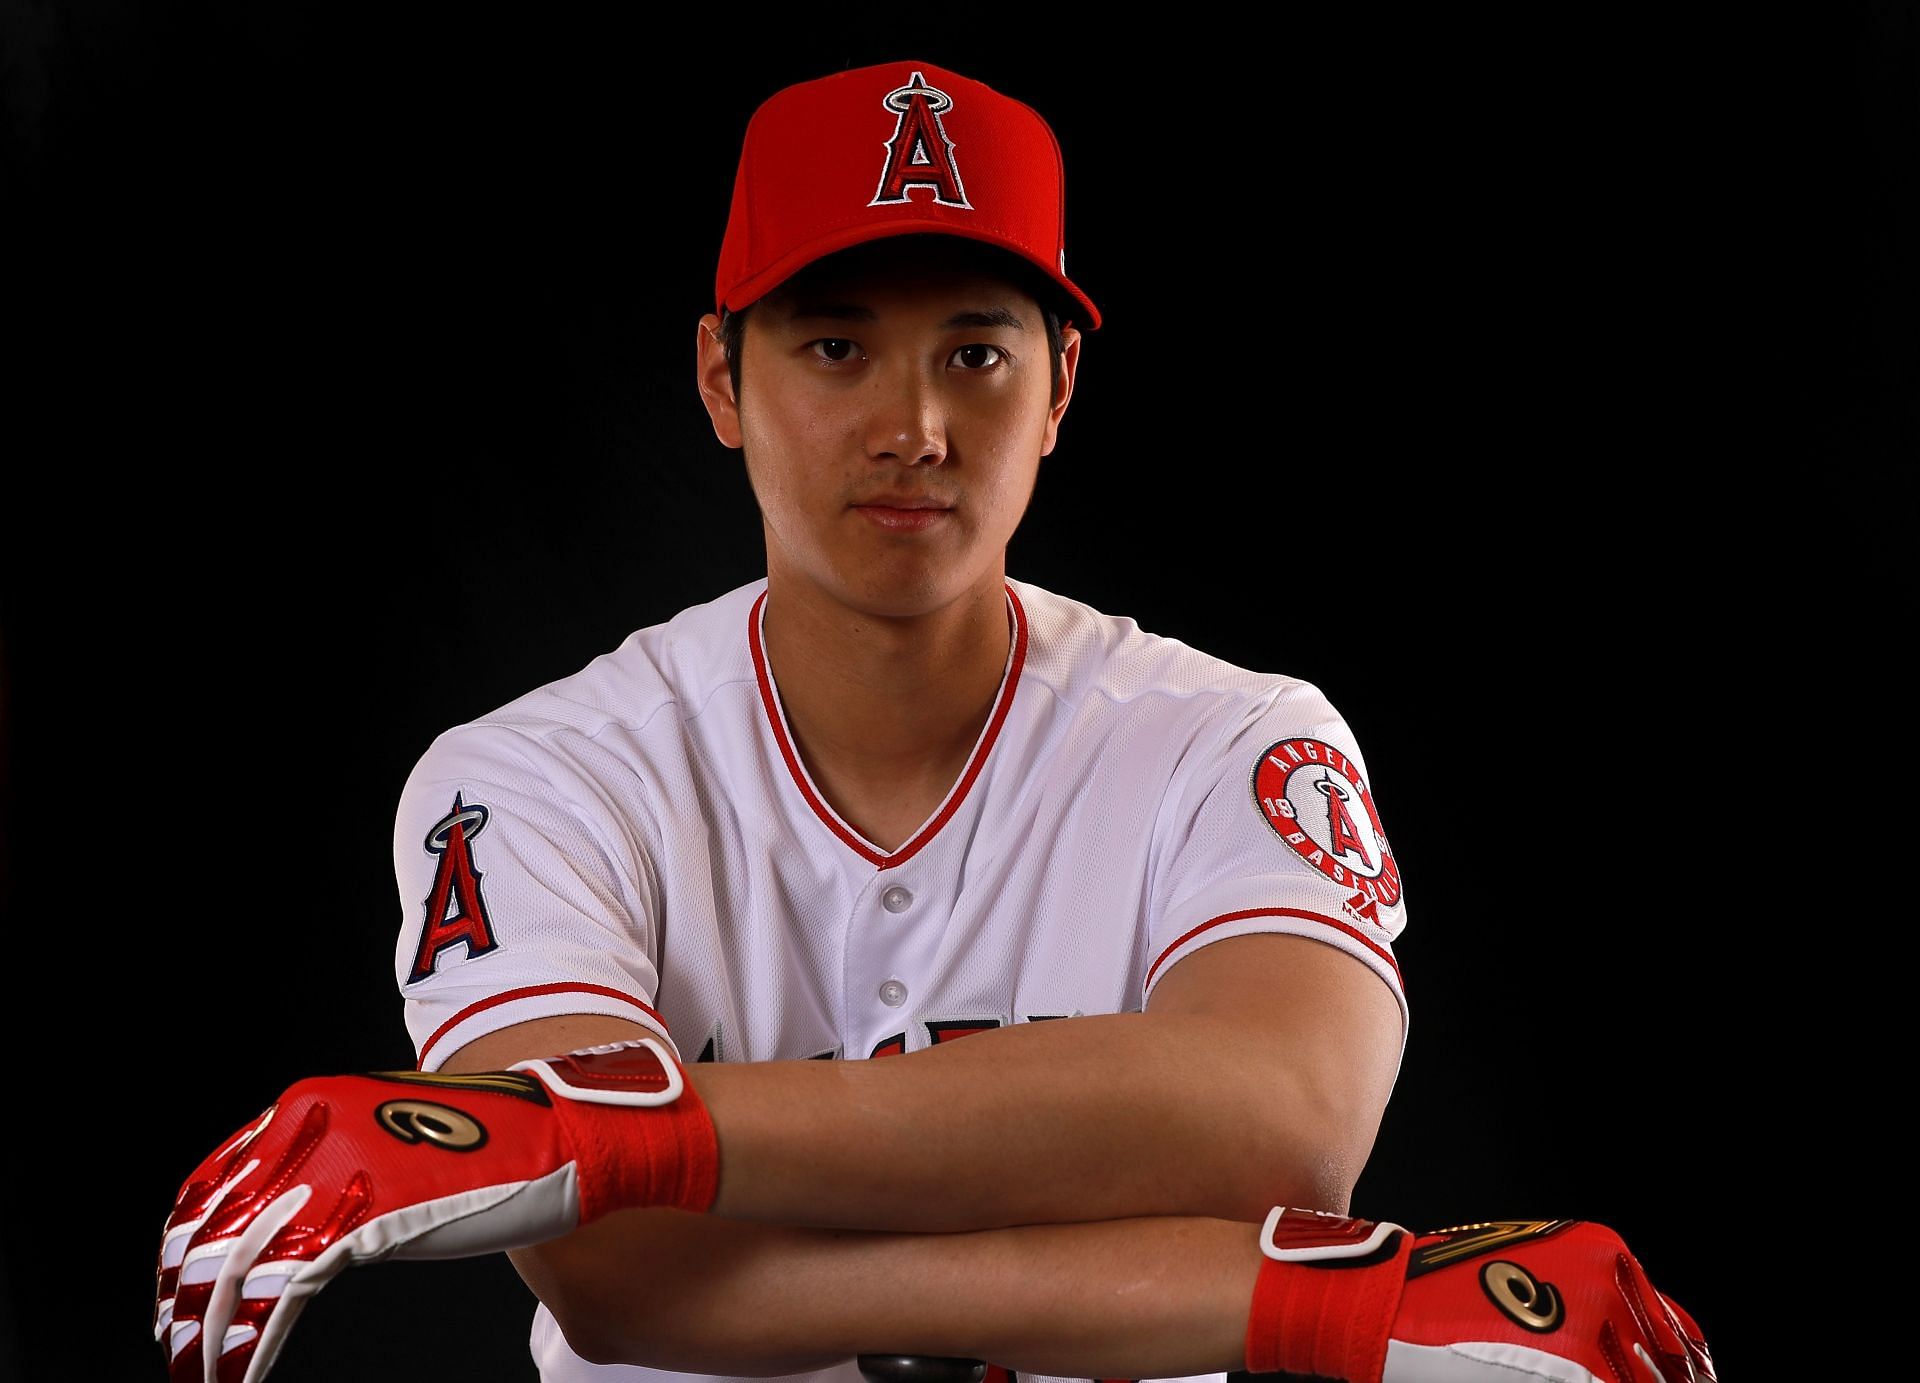 Shohei Ohtani has one of the most followed accounts in all of the MLB